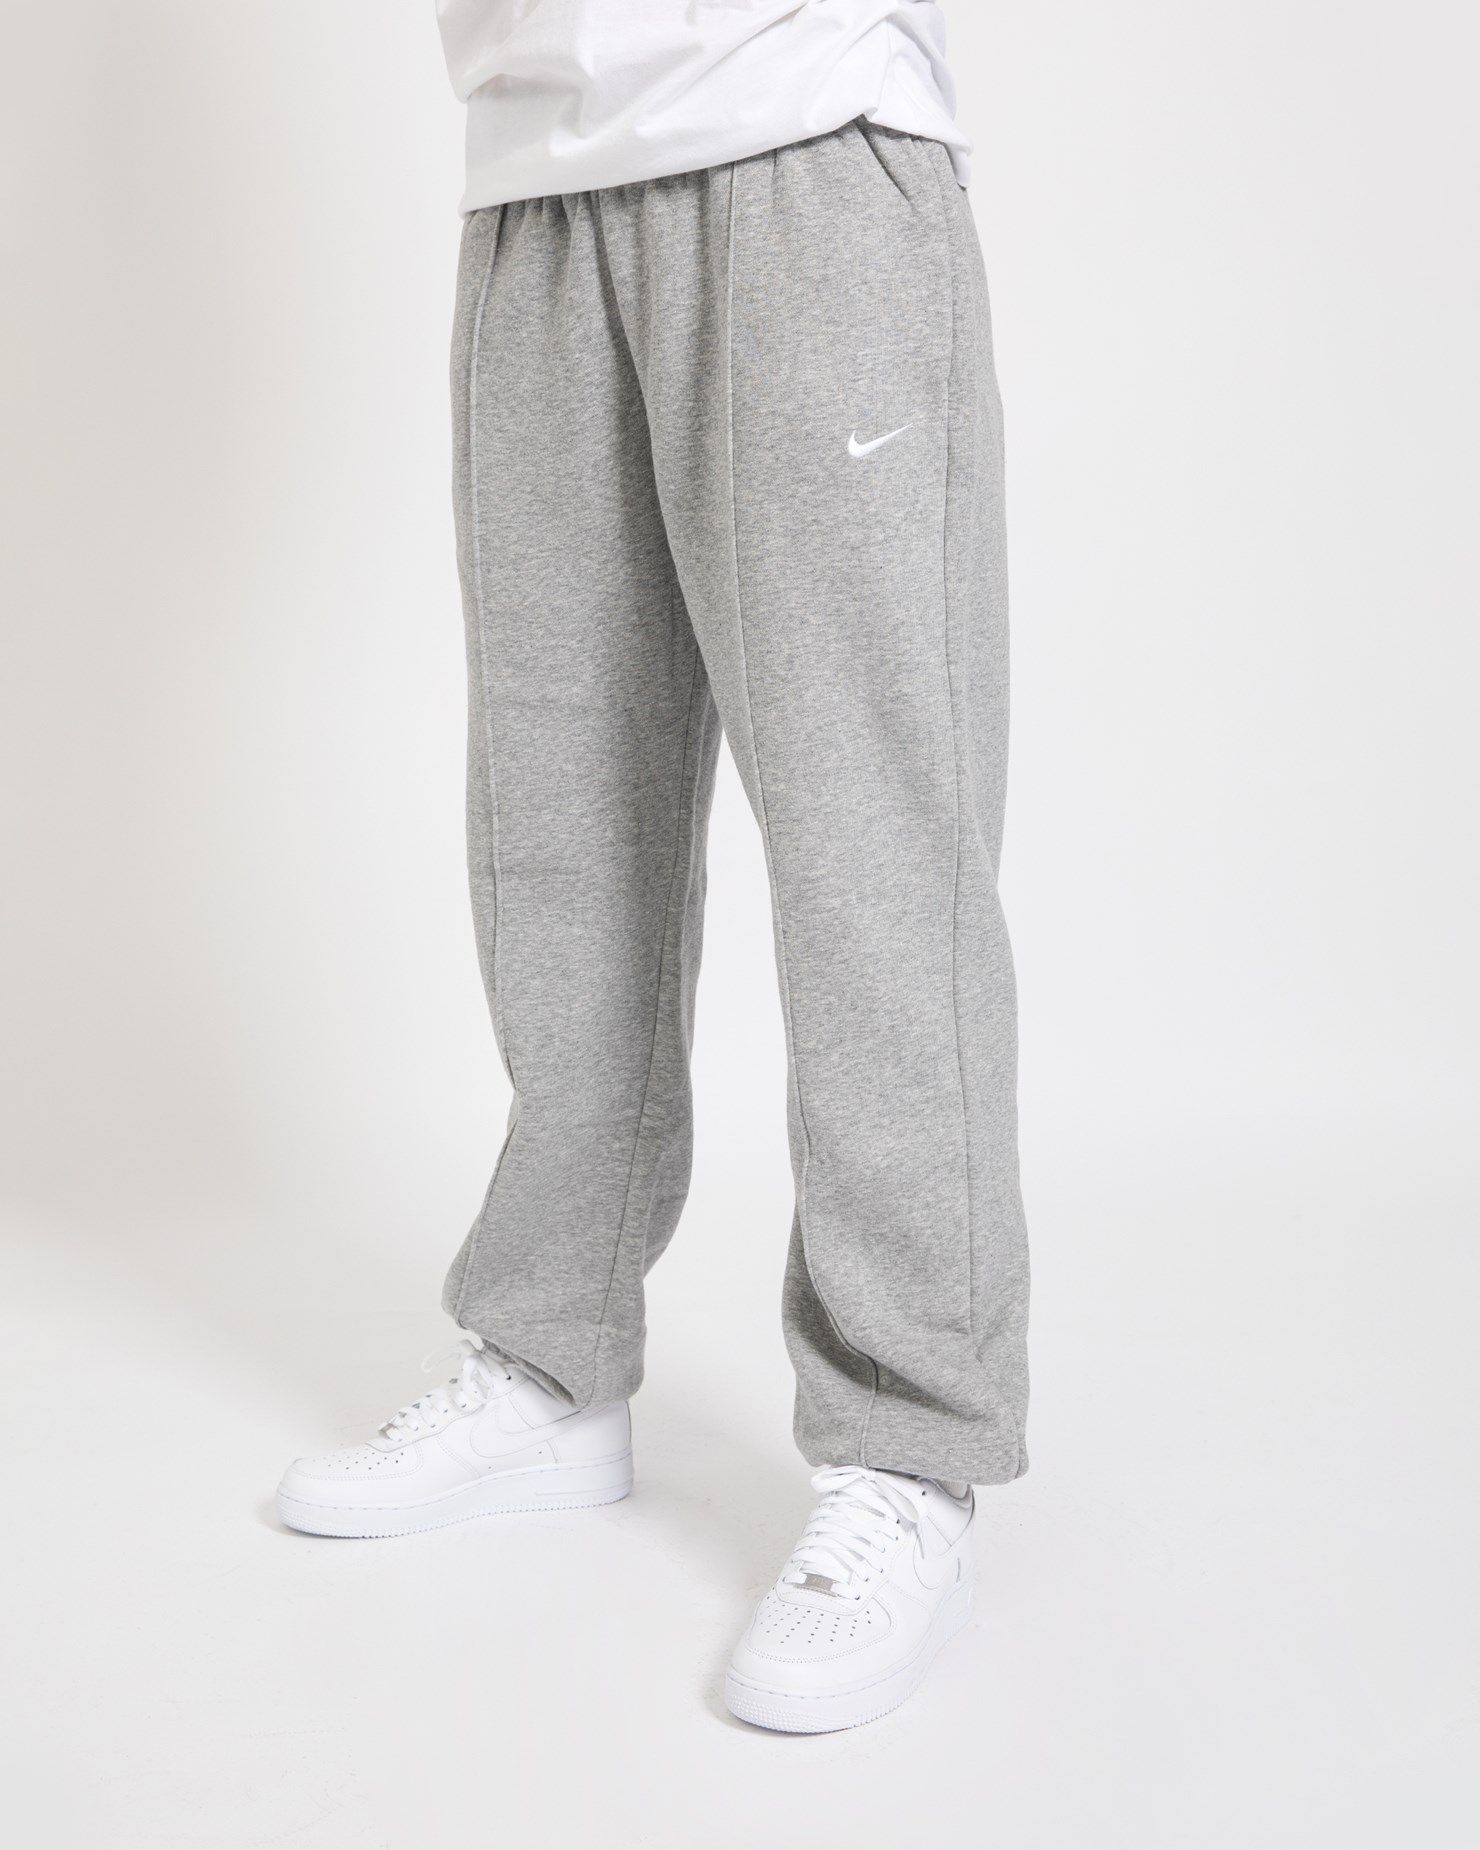 How to Wear Fleece Pants: The Awesome Thick Sweatpants for Women